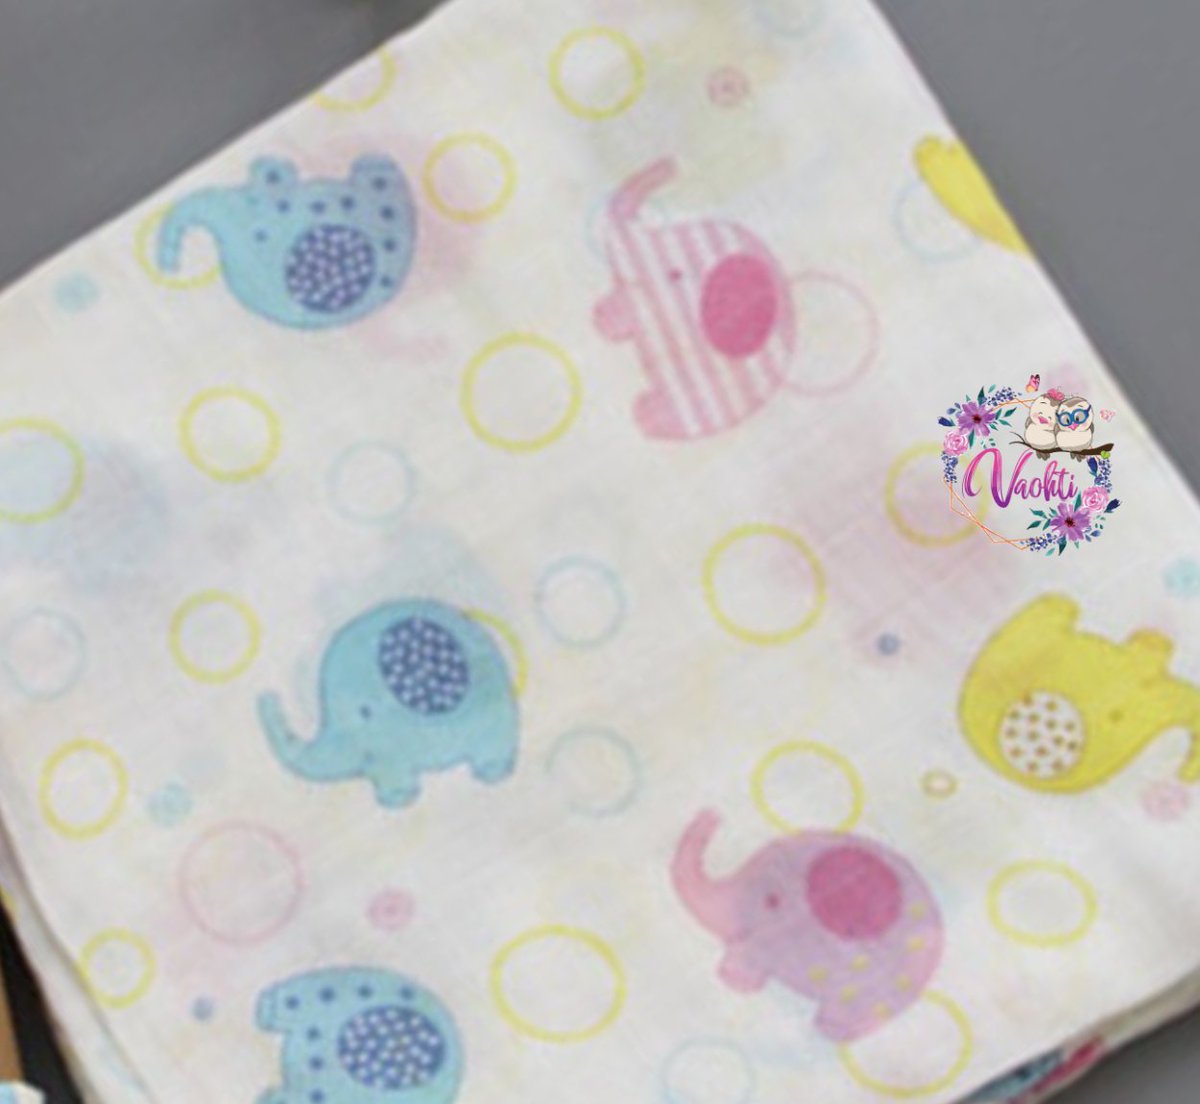 Our cute elephant 100% #organic #bamboo #muslinblanket for your #baby to #love #snuggling in ❤️

bit.ly/VAOHTIBABY

#Vaohti #mom #mama #babyshower #babyessentials #swaddle #swaddleblanket #muslinswaddle #receivingblanket #muslin #organicmuslin #babybump #pregnant #maternity